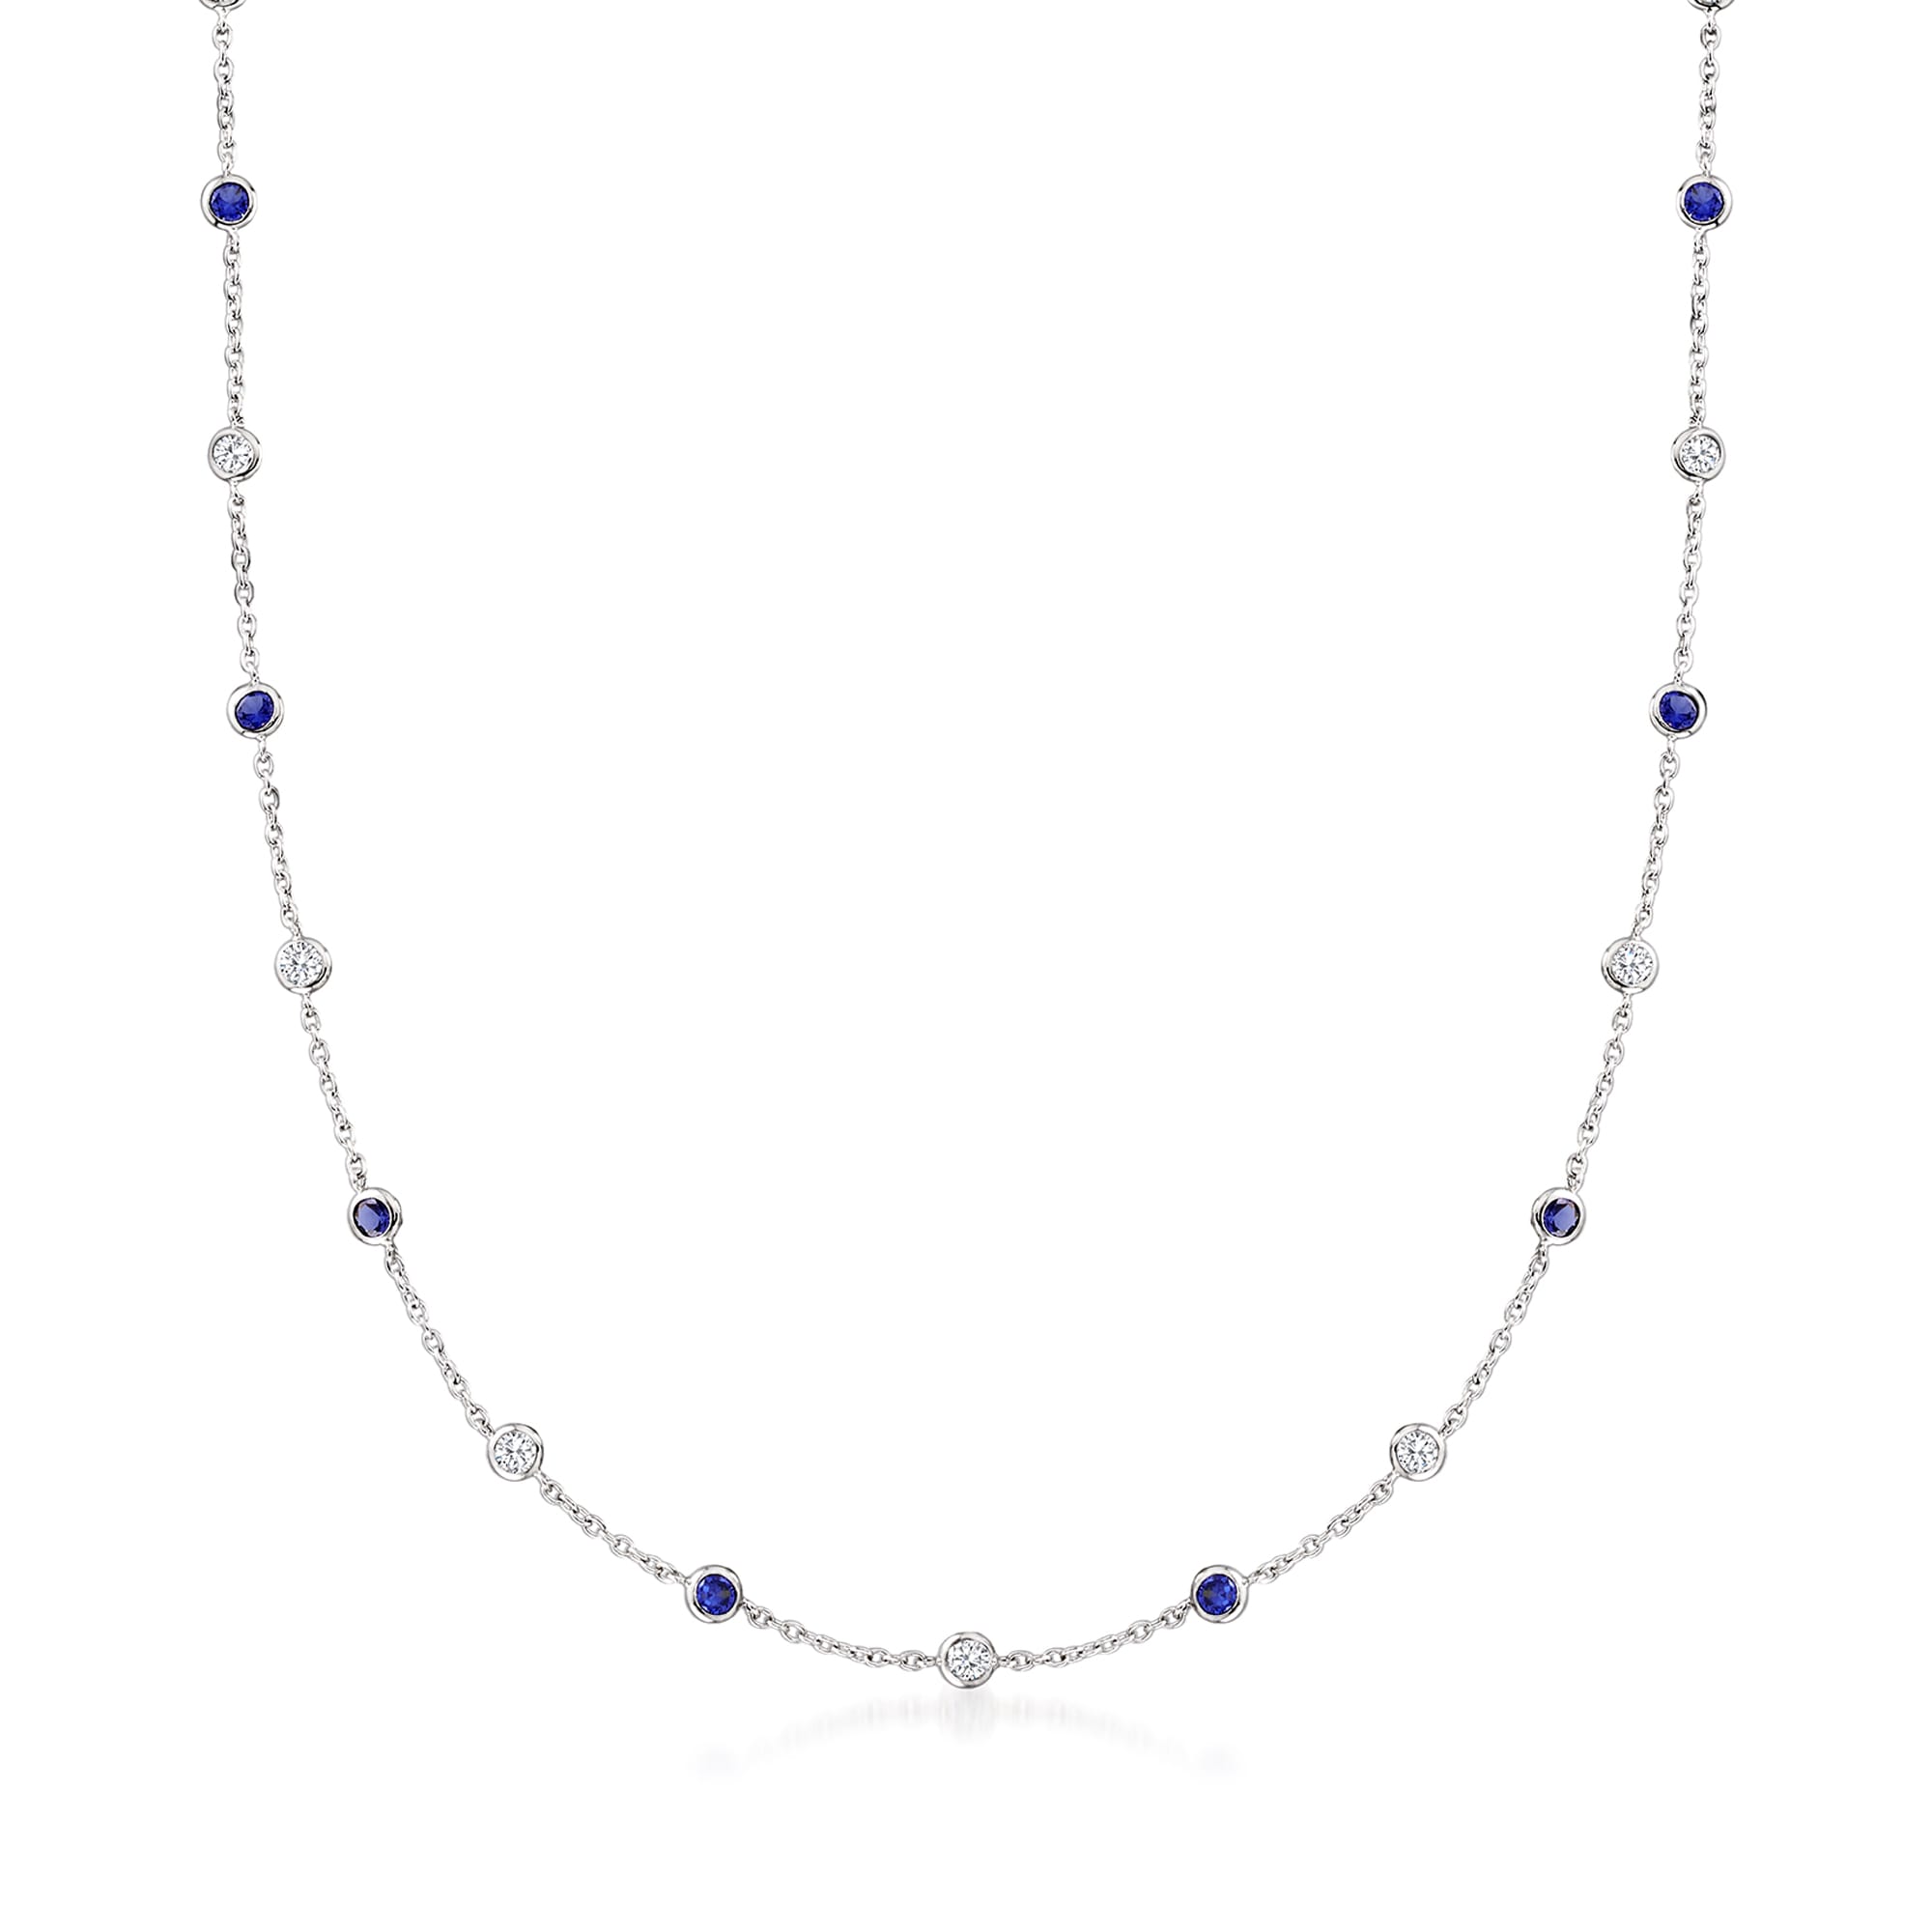 2.30 ct. t.w. CZ and 2.00 ct. t.w. Simulated Sapphire Station Necklace in  Sterling Silver